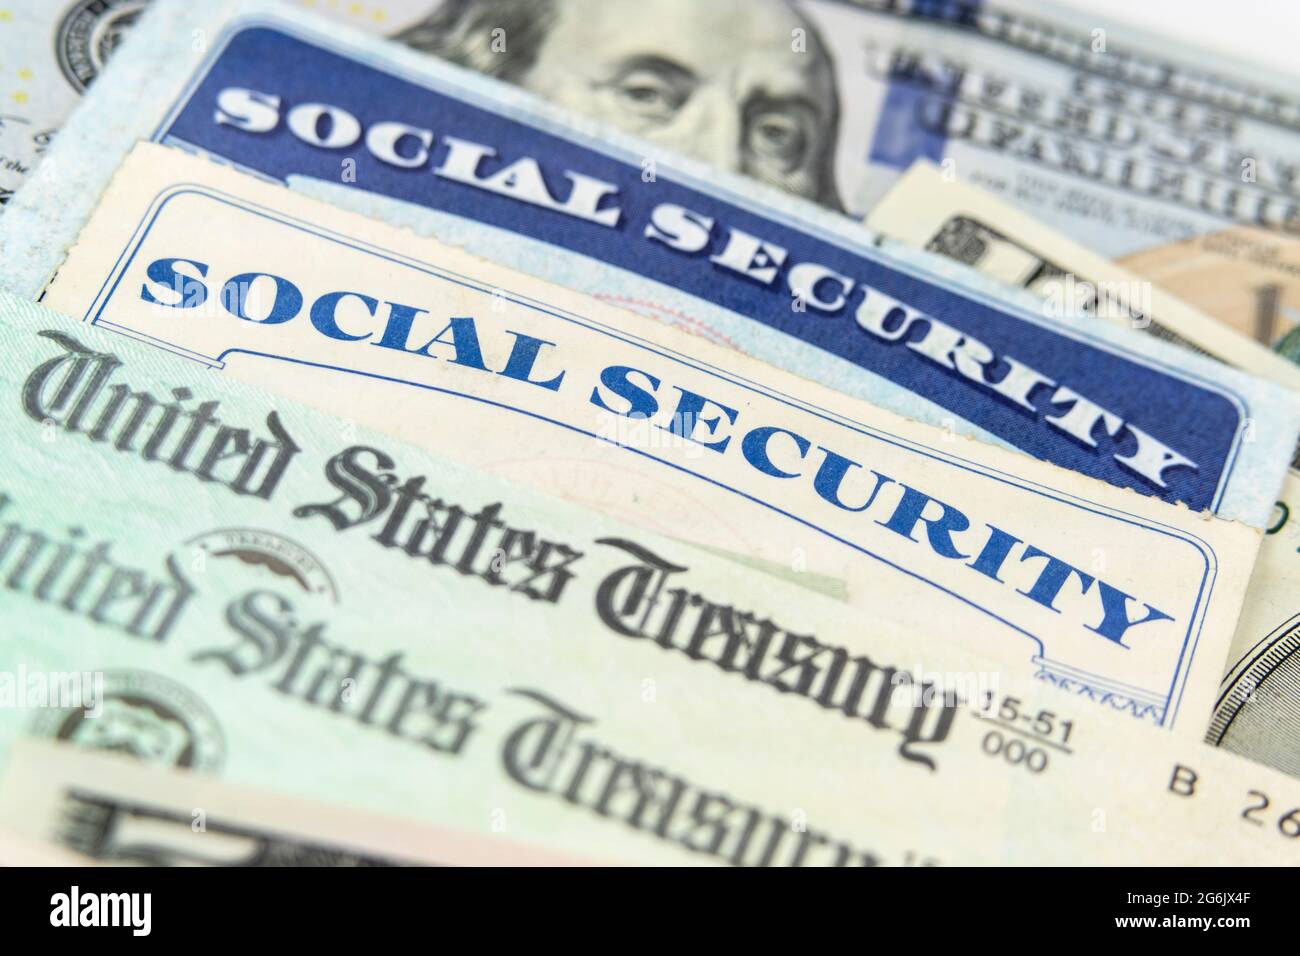 Close up view of Social Security cards and United States Treasury checks Stock Photo